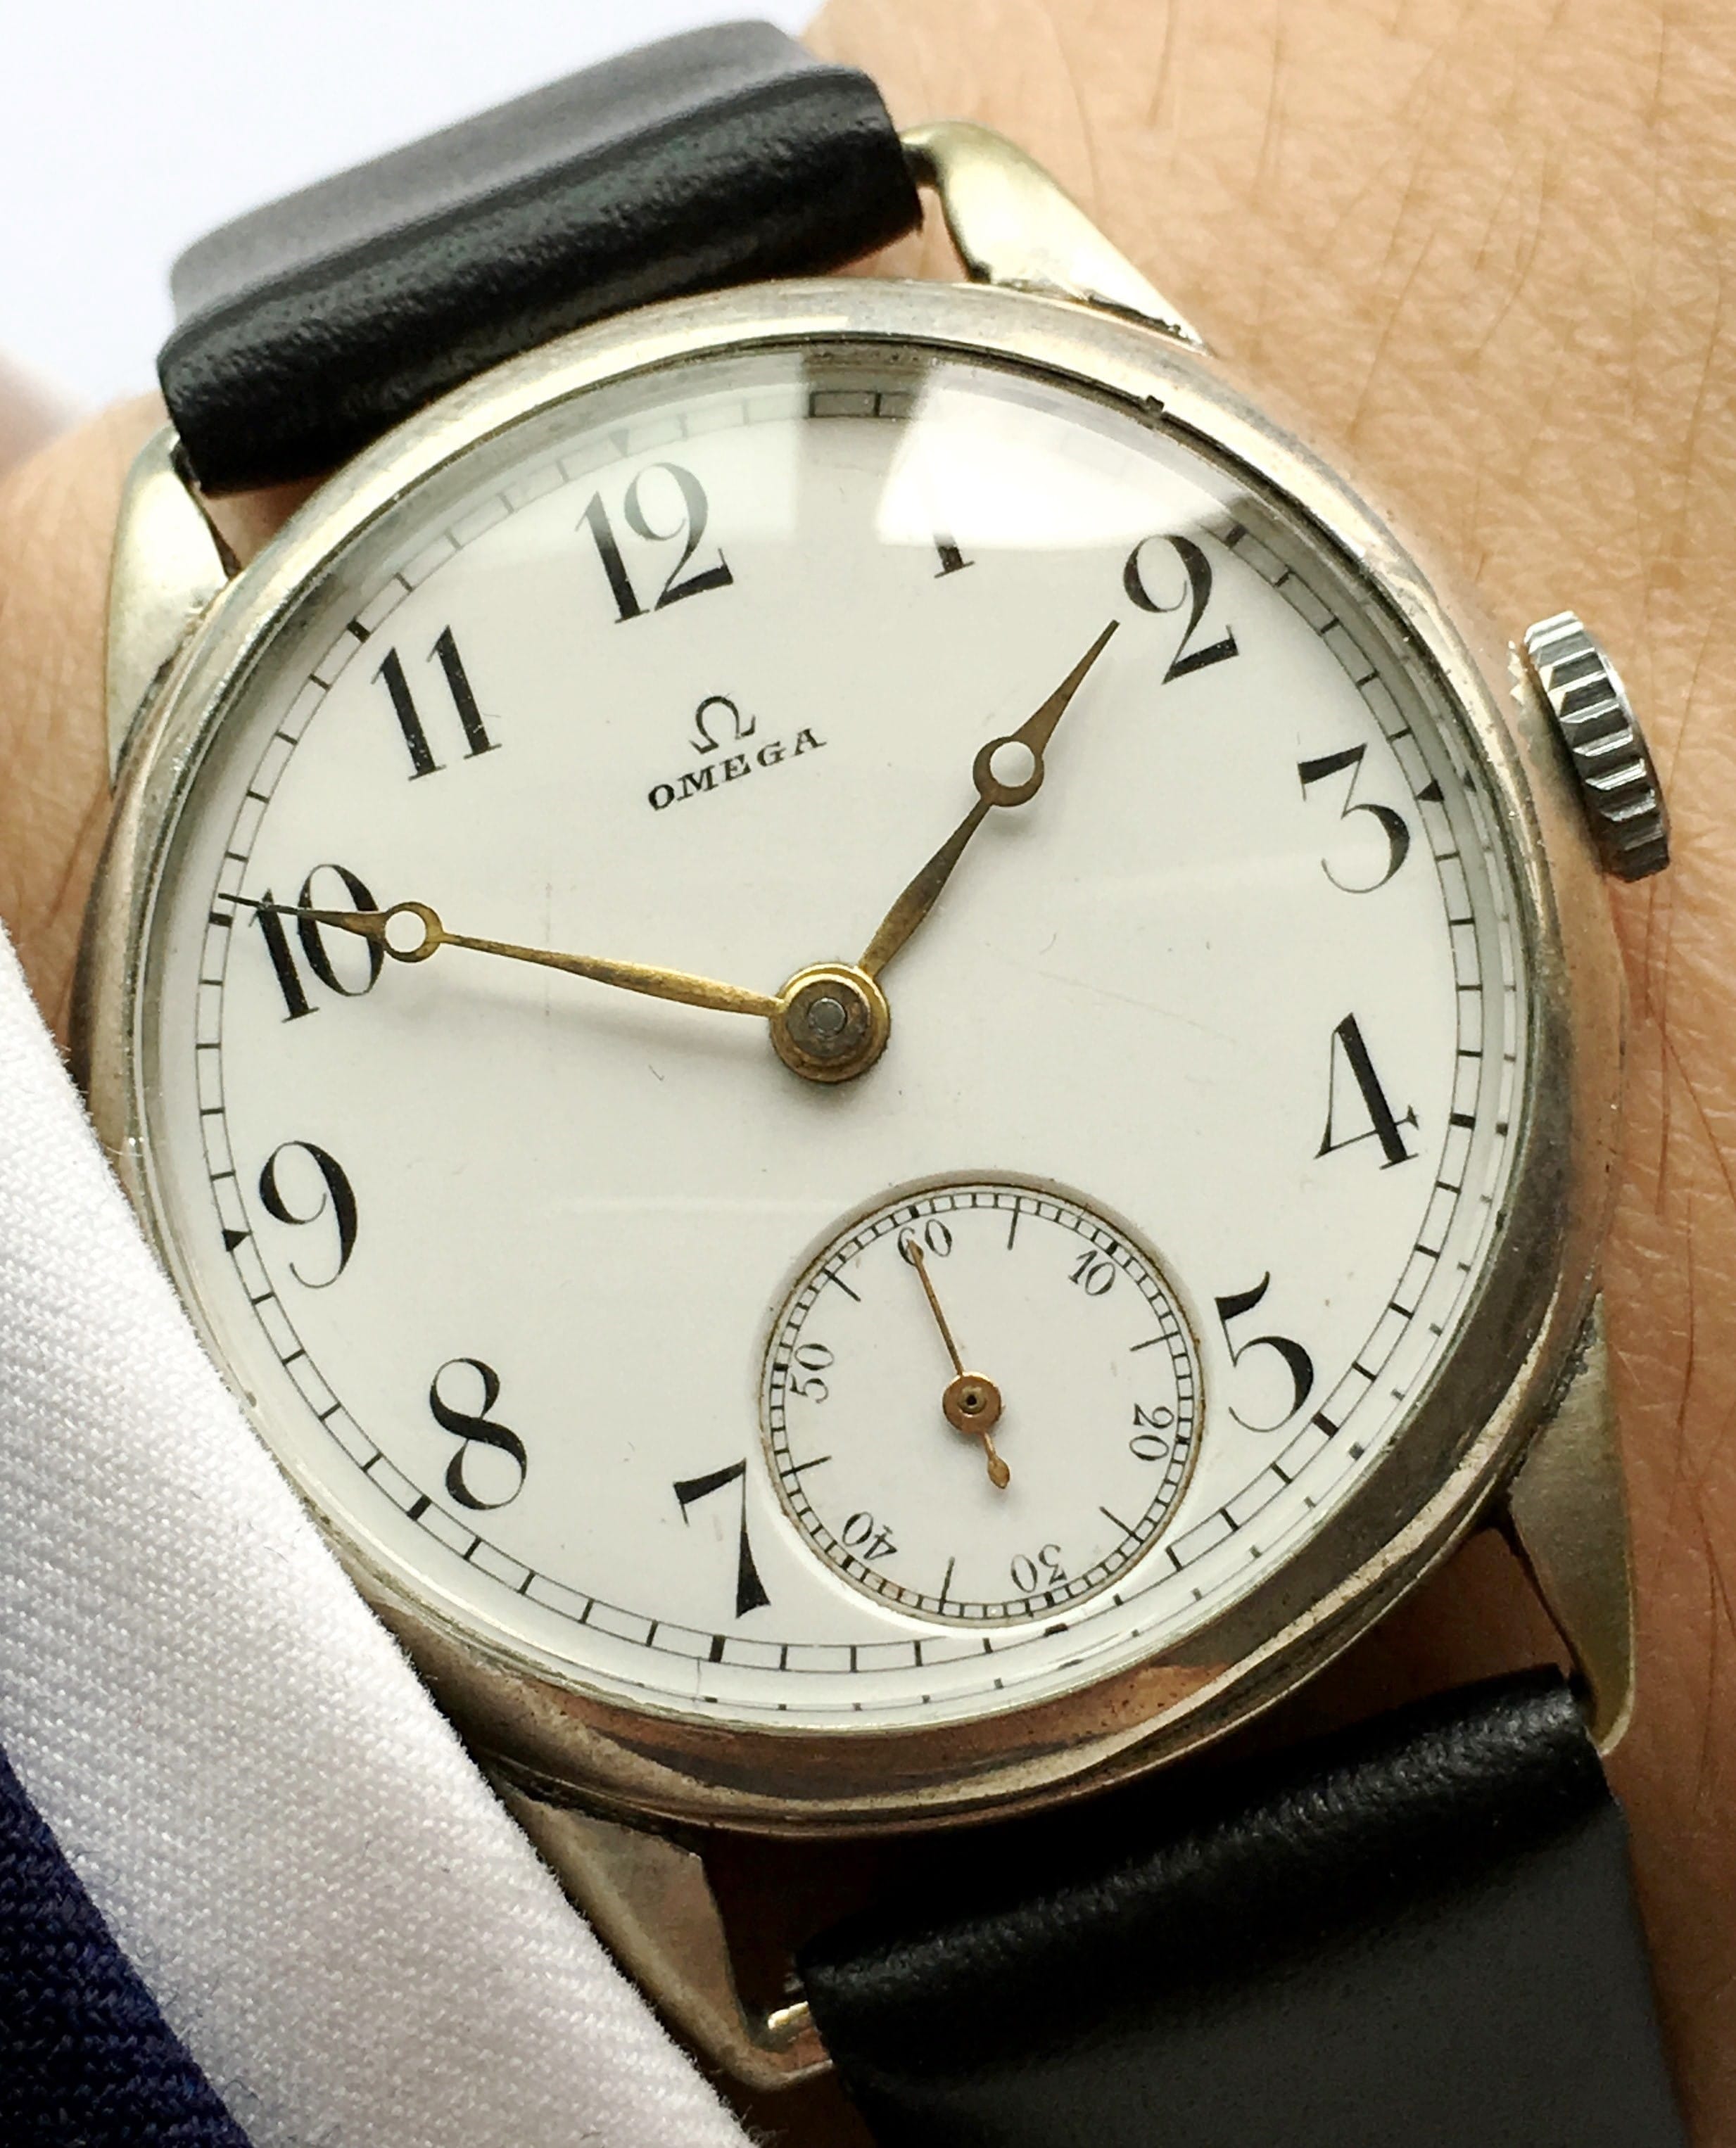 Outstanding 1930 Omega with 925 silver 